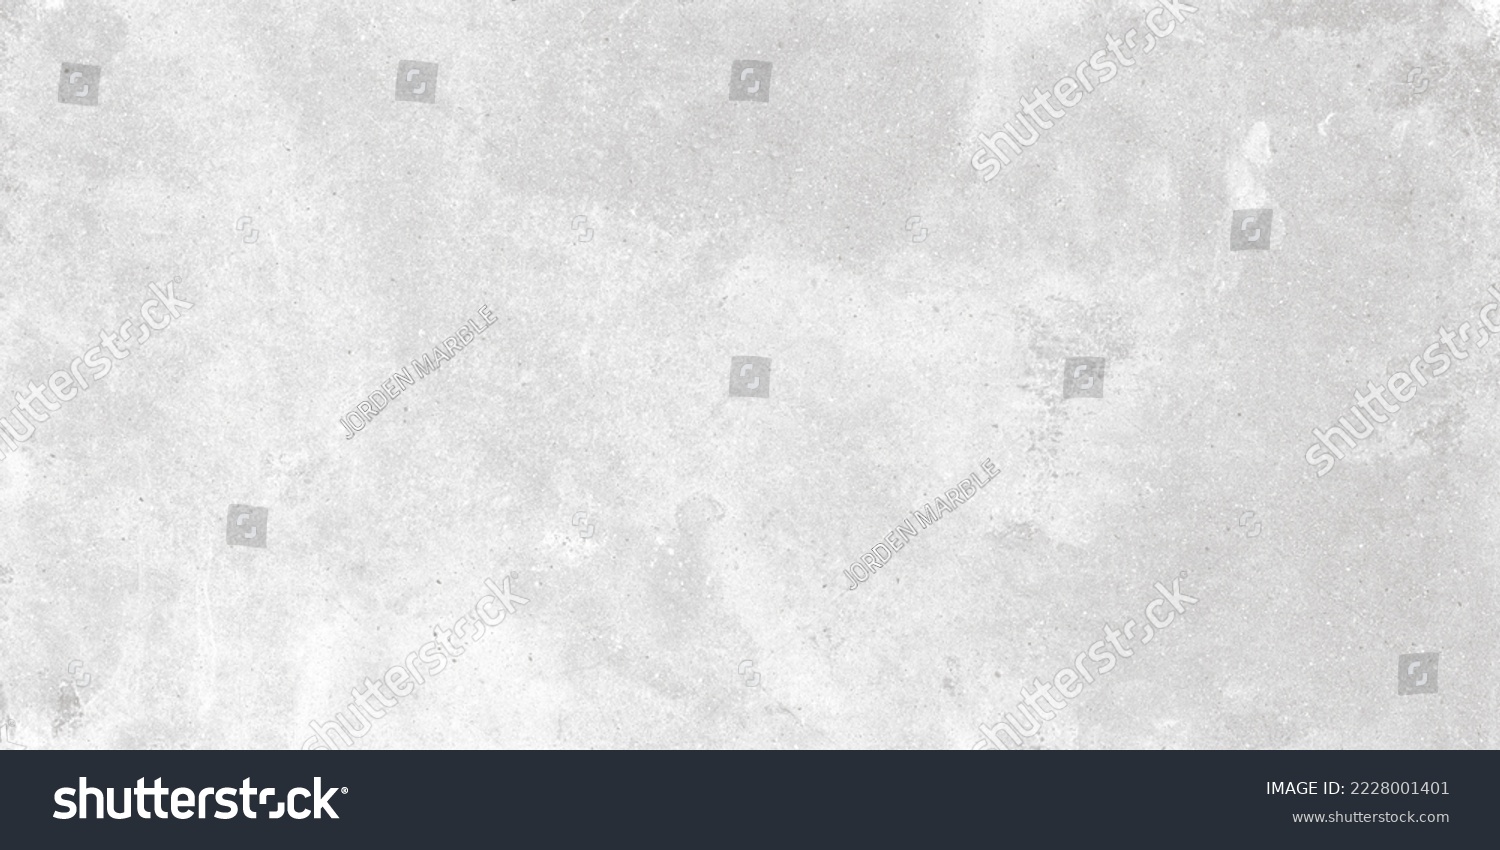 Modern grey limestone texture background in white light polished empty wall paper. luxury gray concrete stone table top desk view concept grunge seamless marble, cement floor surface background smooth #2228001401